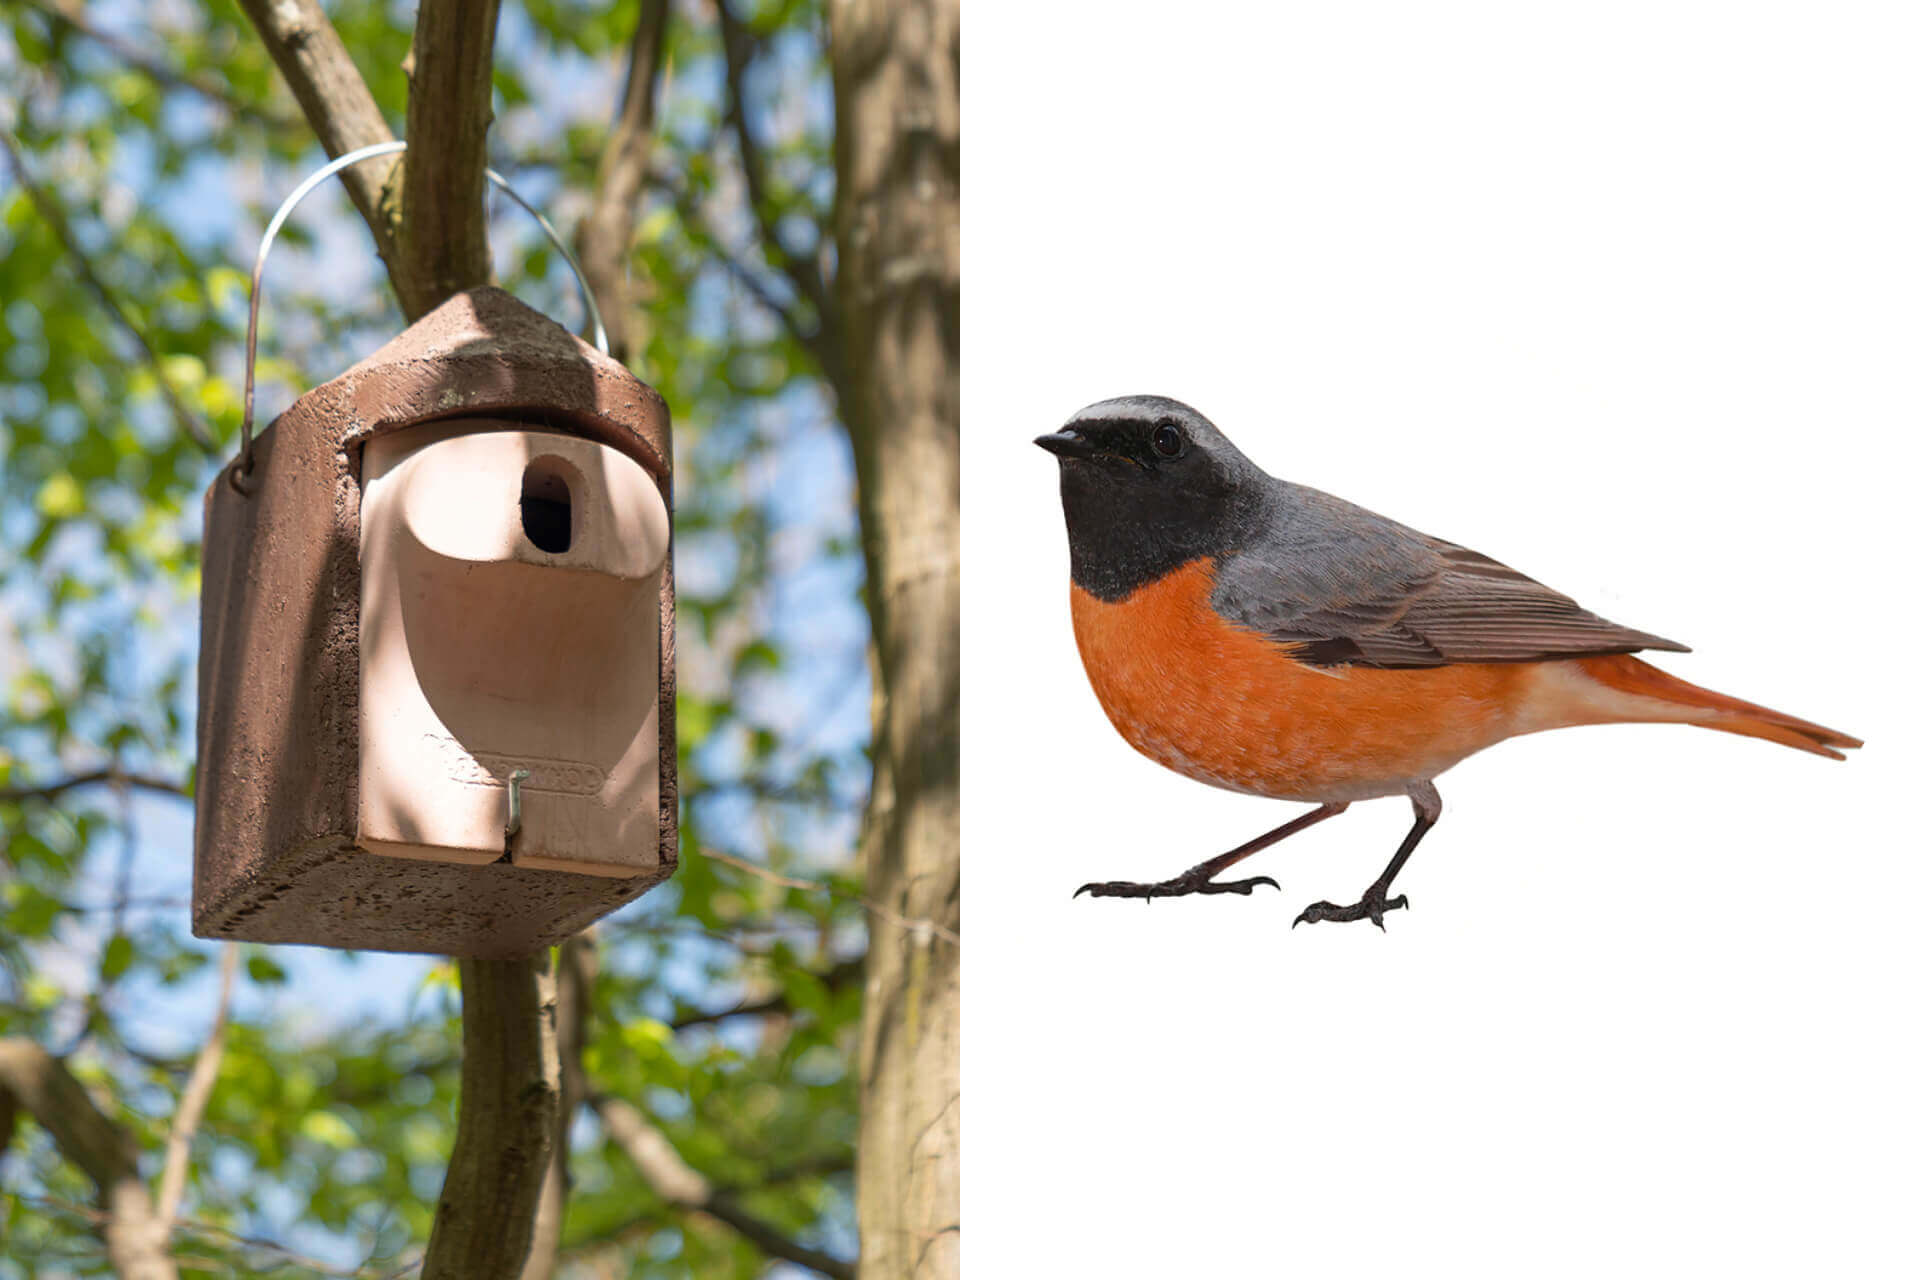 A little house for redstarts (pictured), nuthatches, or sparrows: These small suspended houses invite several bird species to breed in them—that’s why a larger number of them are hanging at Schreiner Group.